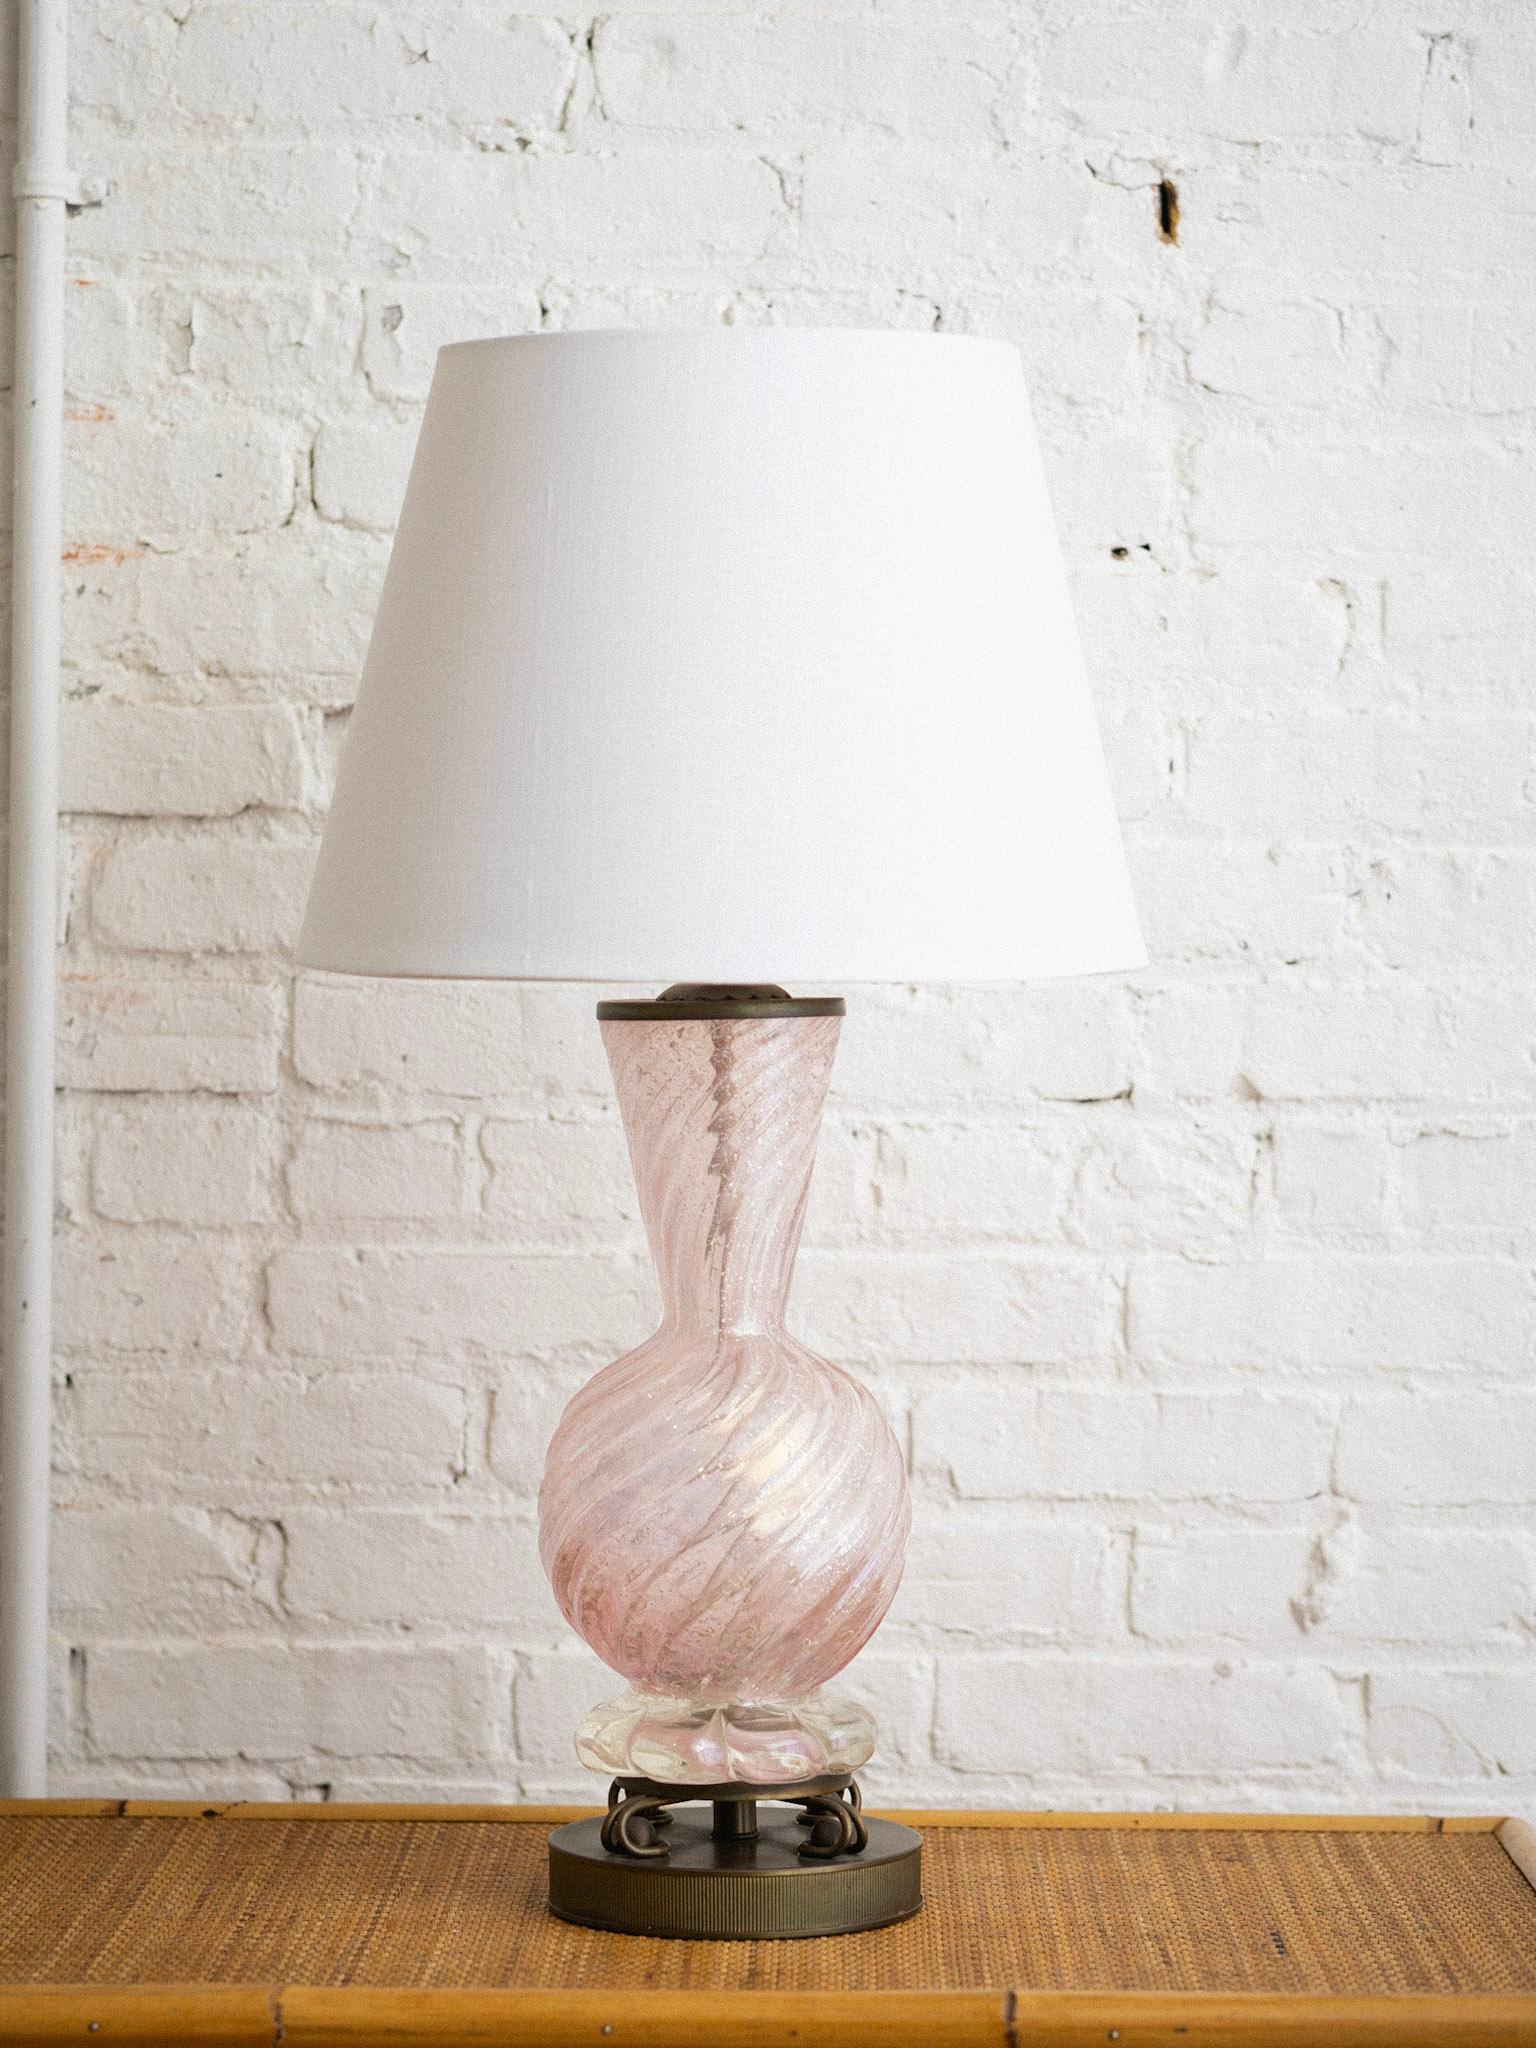 Midcentury Barovier Toso Murano glass lamp. Glittery pale pink translucent glass and antiqued brass hardware. Lamp shade not included. Harp adds an additional 7” to height.